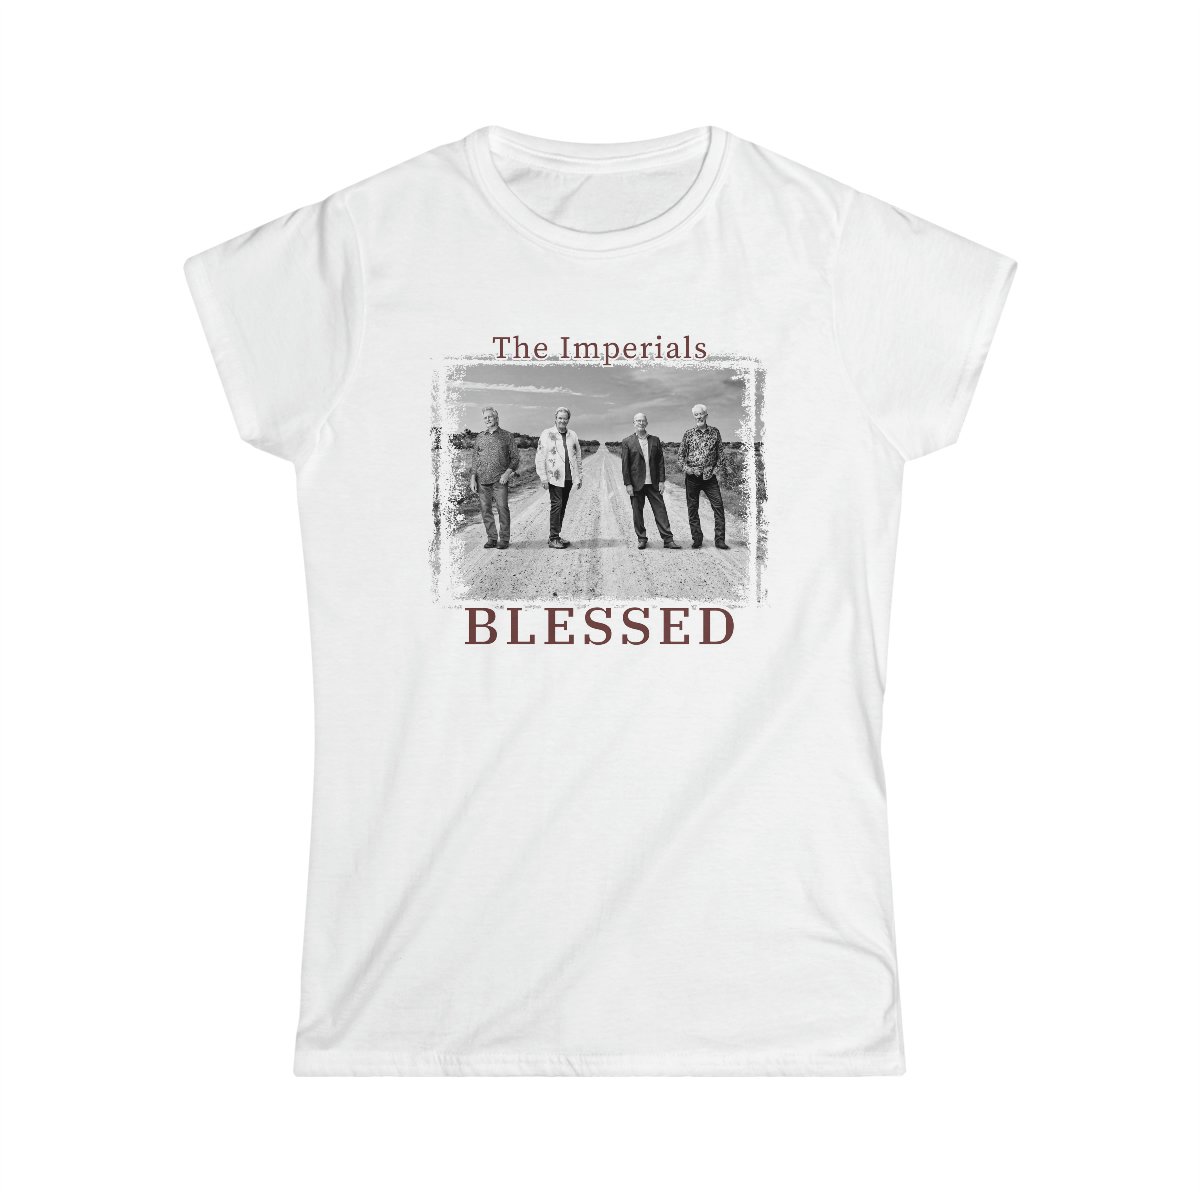 The Imperials – Blessed Women’s Short Sleeve Tshirt 64000L